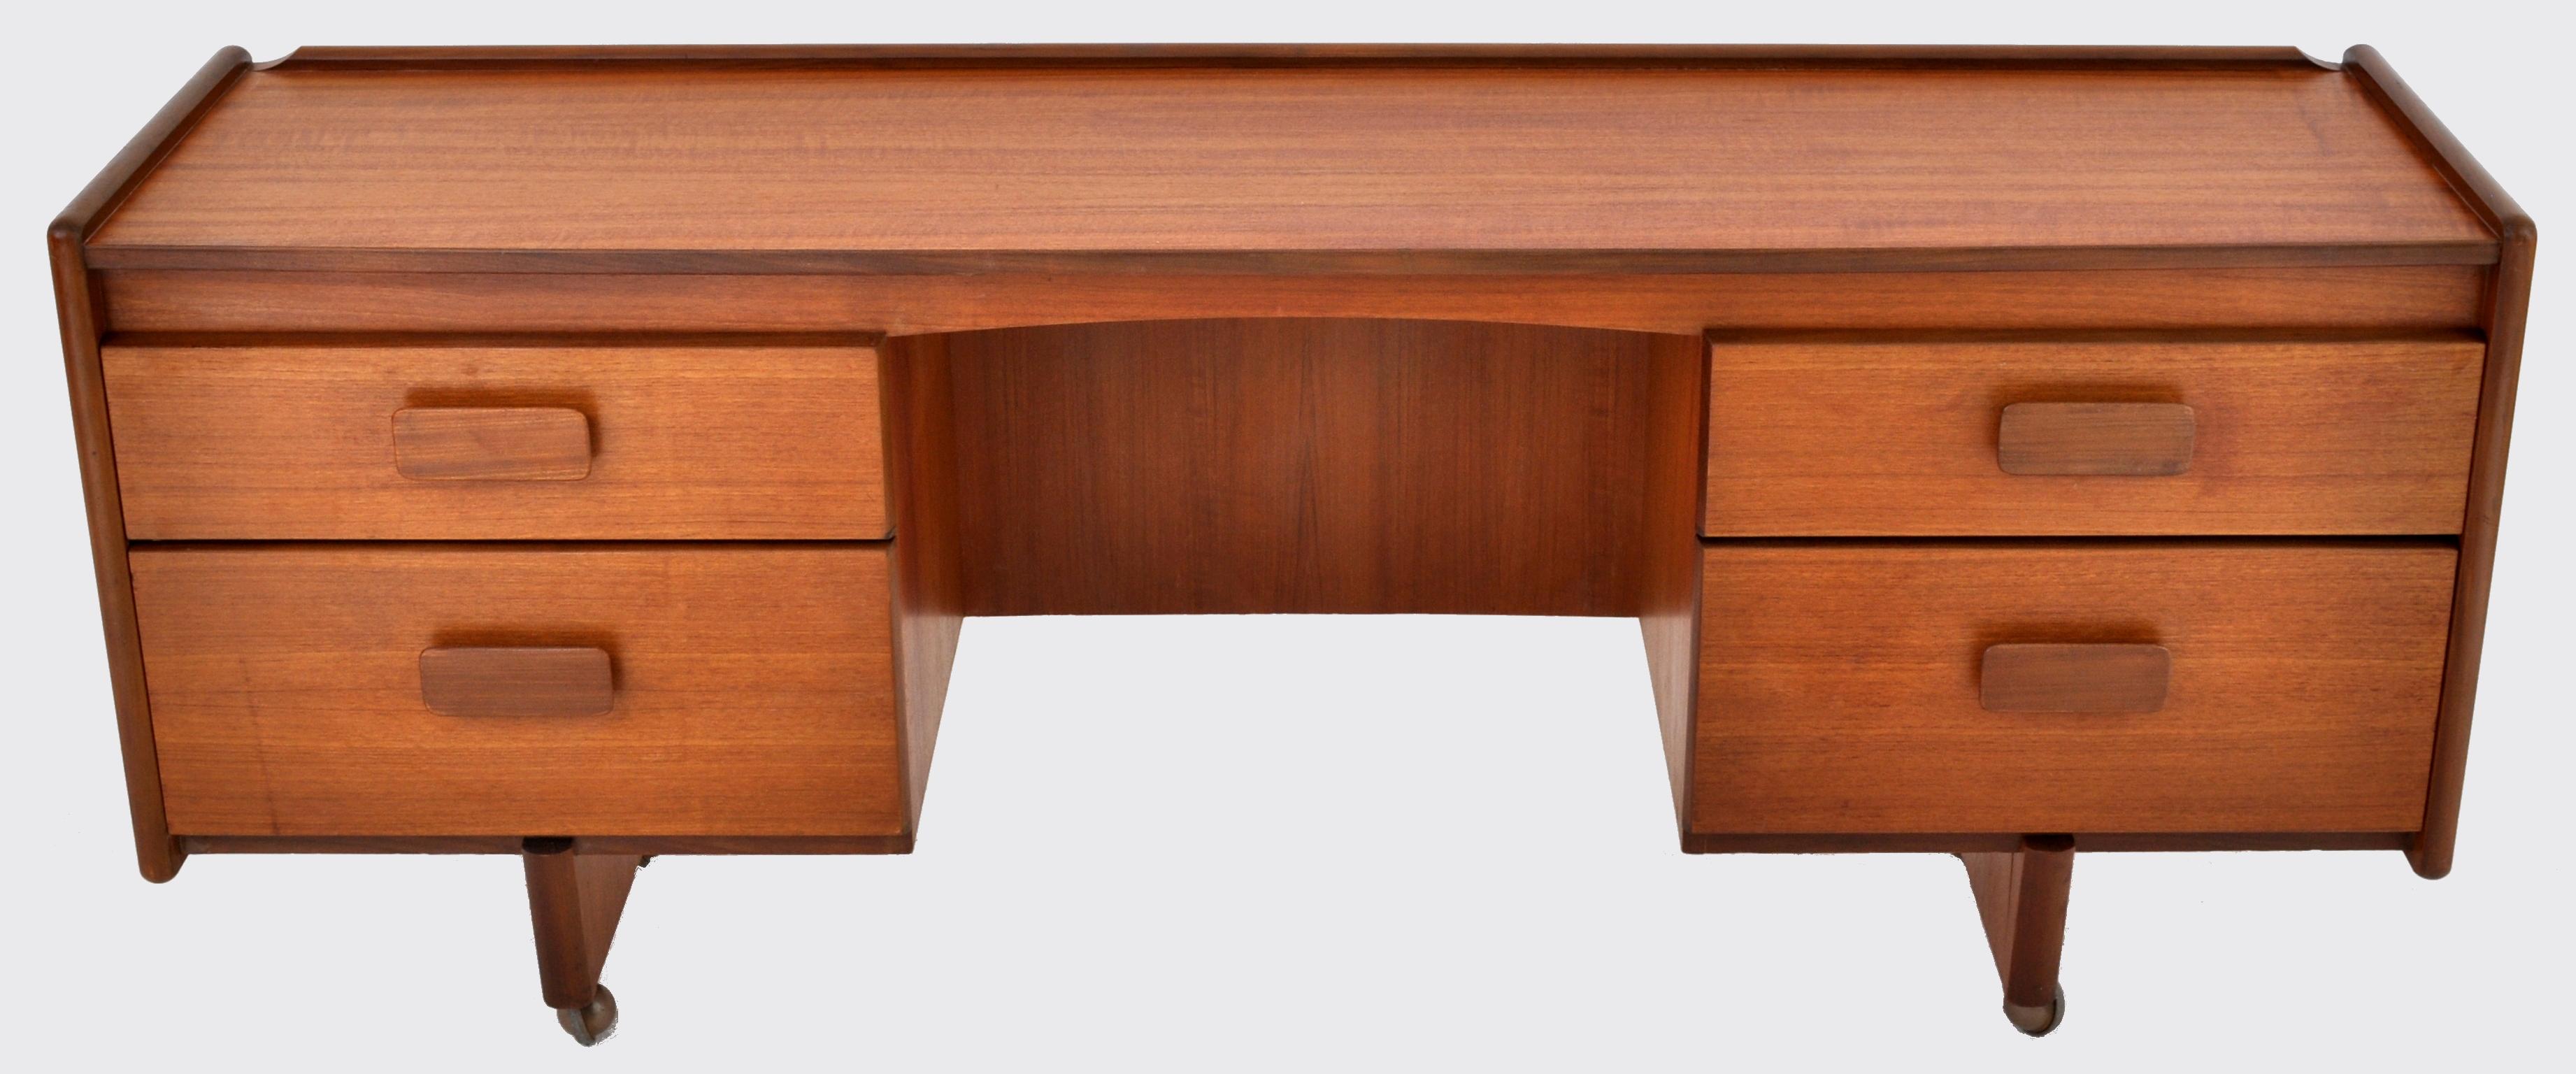 Mid-Century Modern Danish style desk in teak by White & Newton Ltd., 1960s. The desk having a low gallery to the sides and back, having twin pedestals, each with two drawers with unusual rectangular block handles. The desk raised on block-shaped